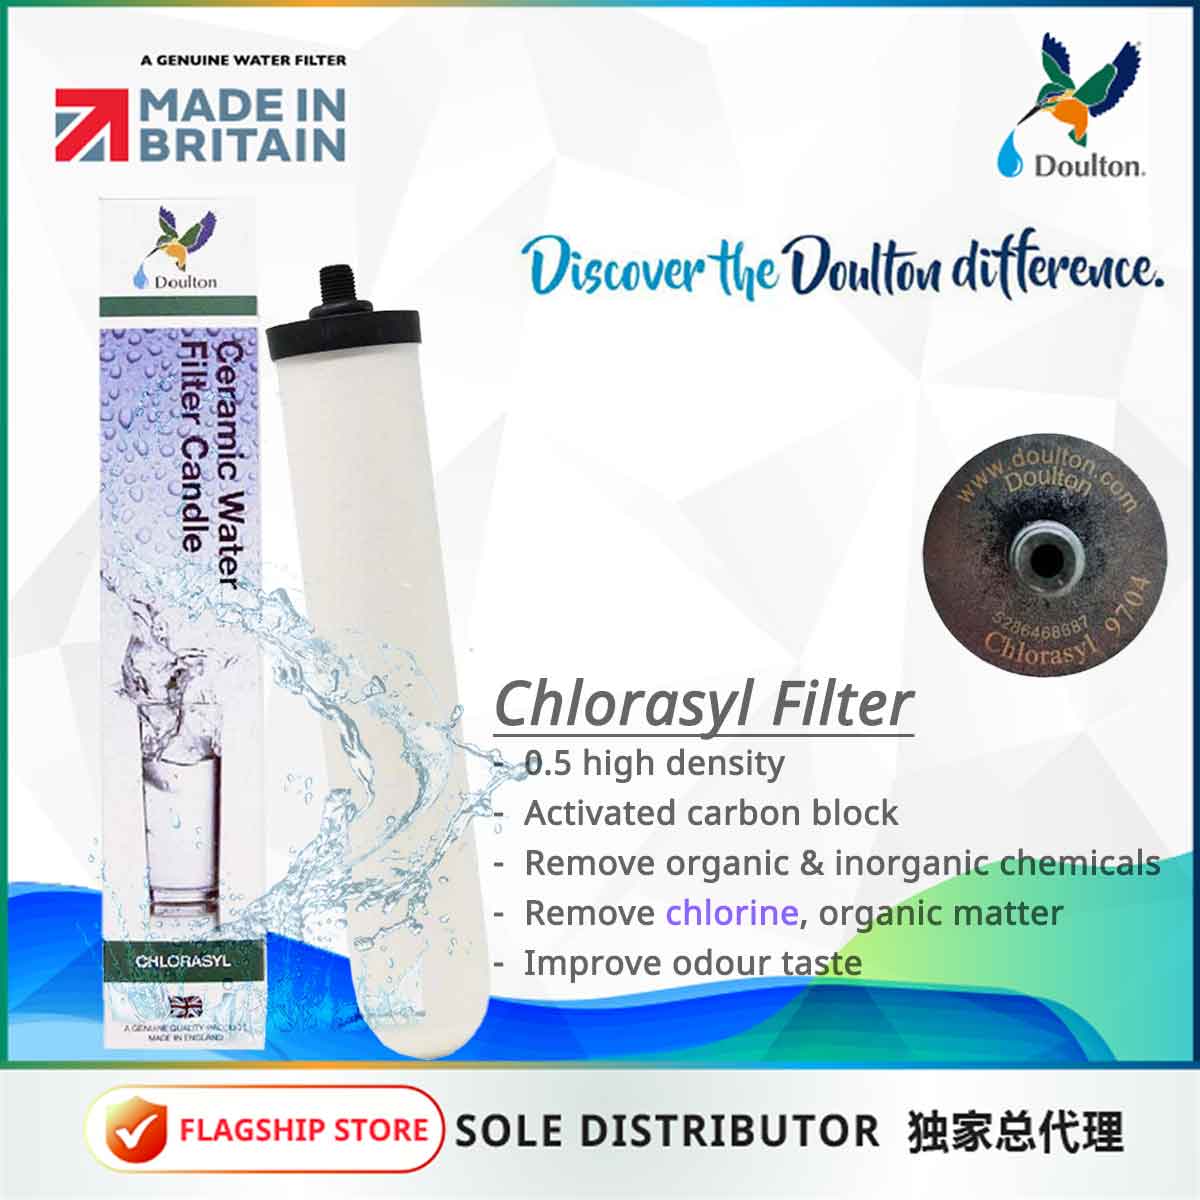 Doulton Water Filters Malaysia Sole Distributor – Doulton Water Purifier,  Sole Distributor (MY) - Britain Premium Brand Since 1826